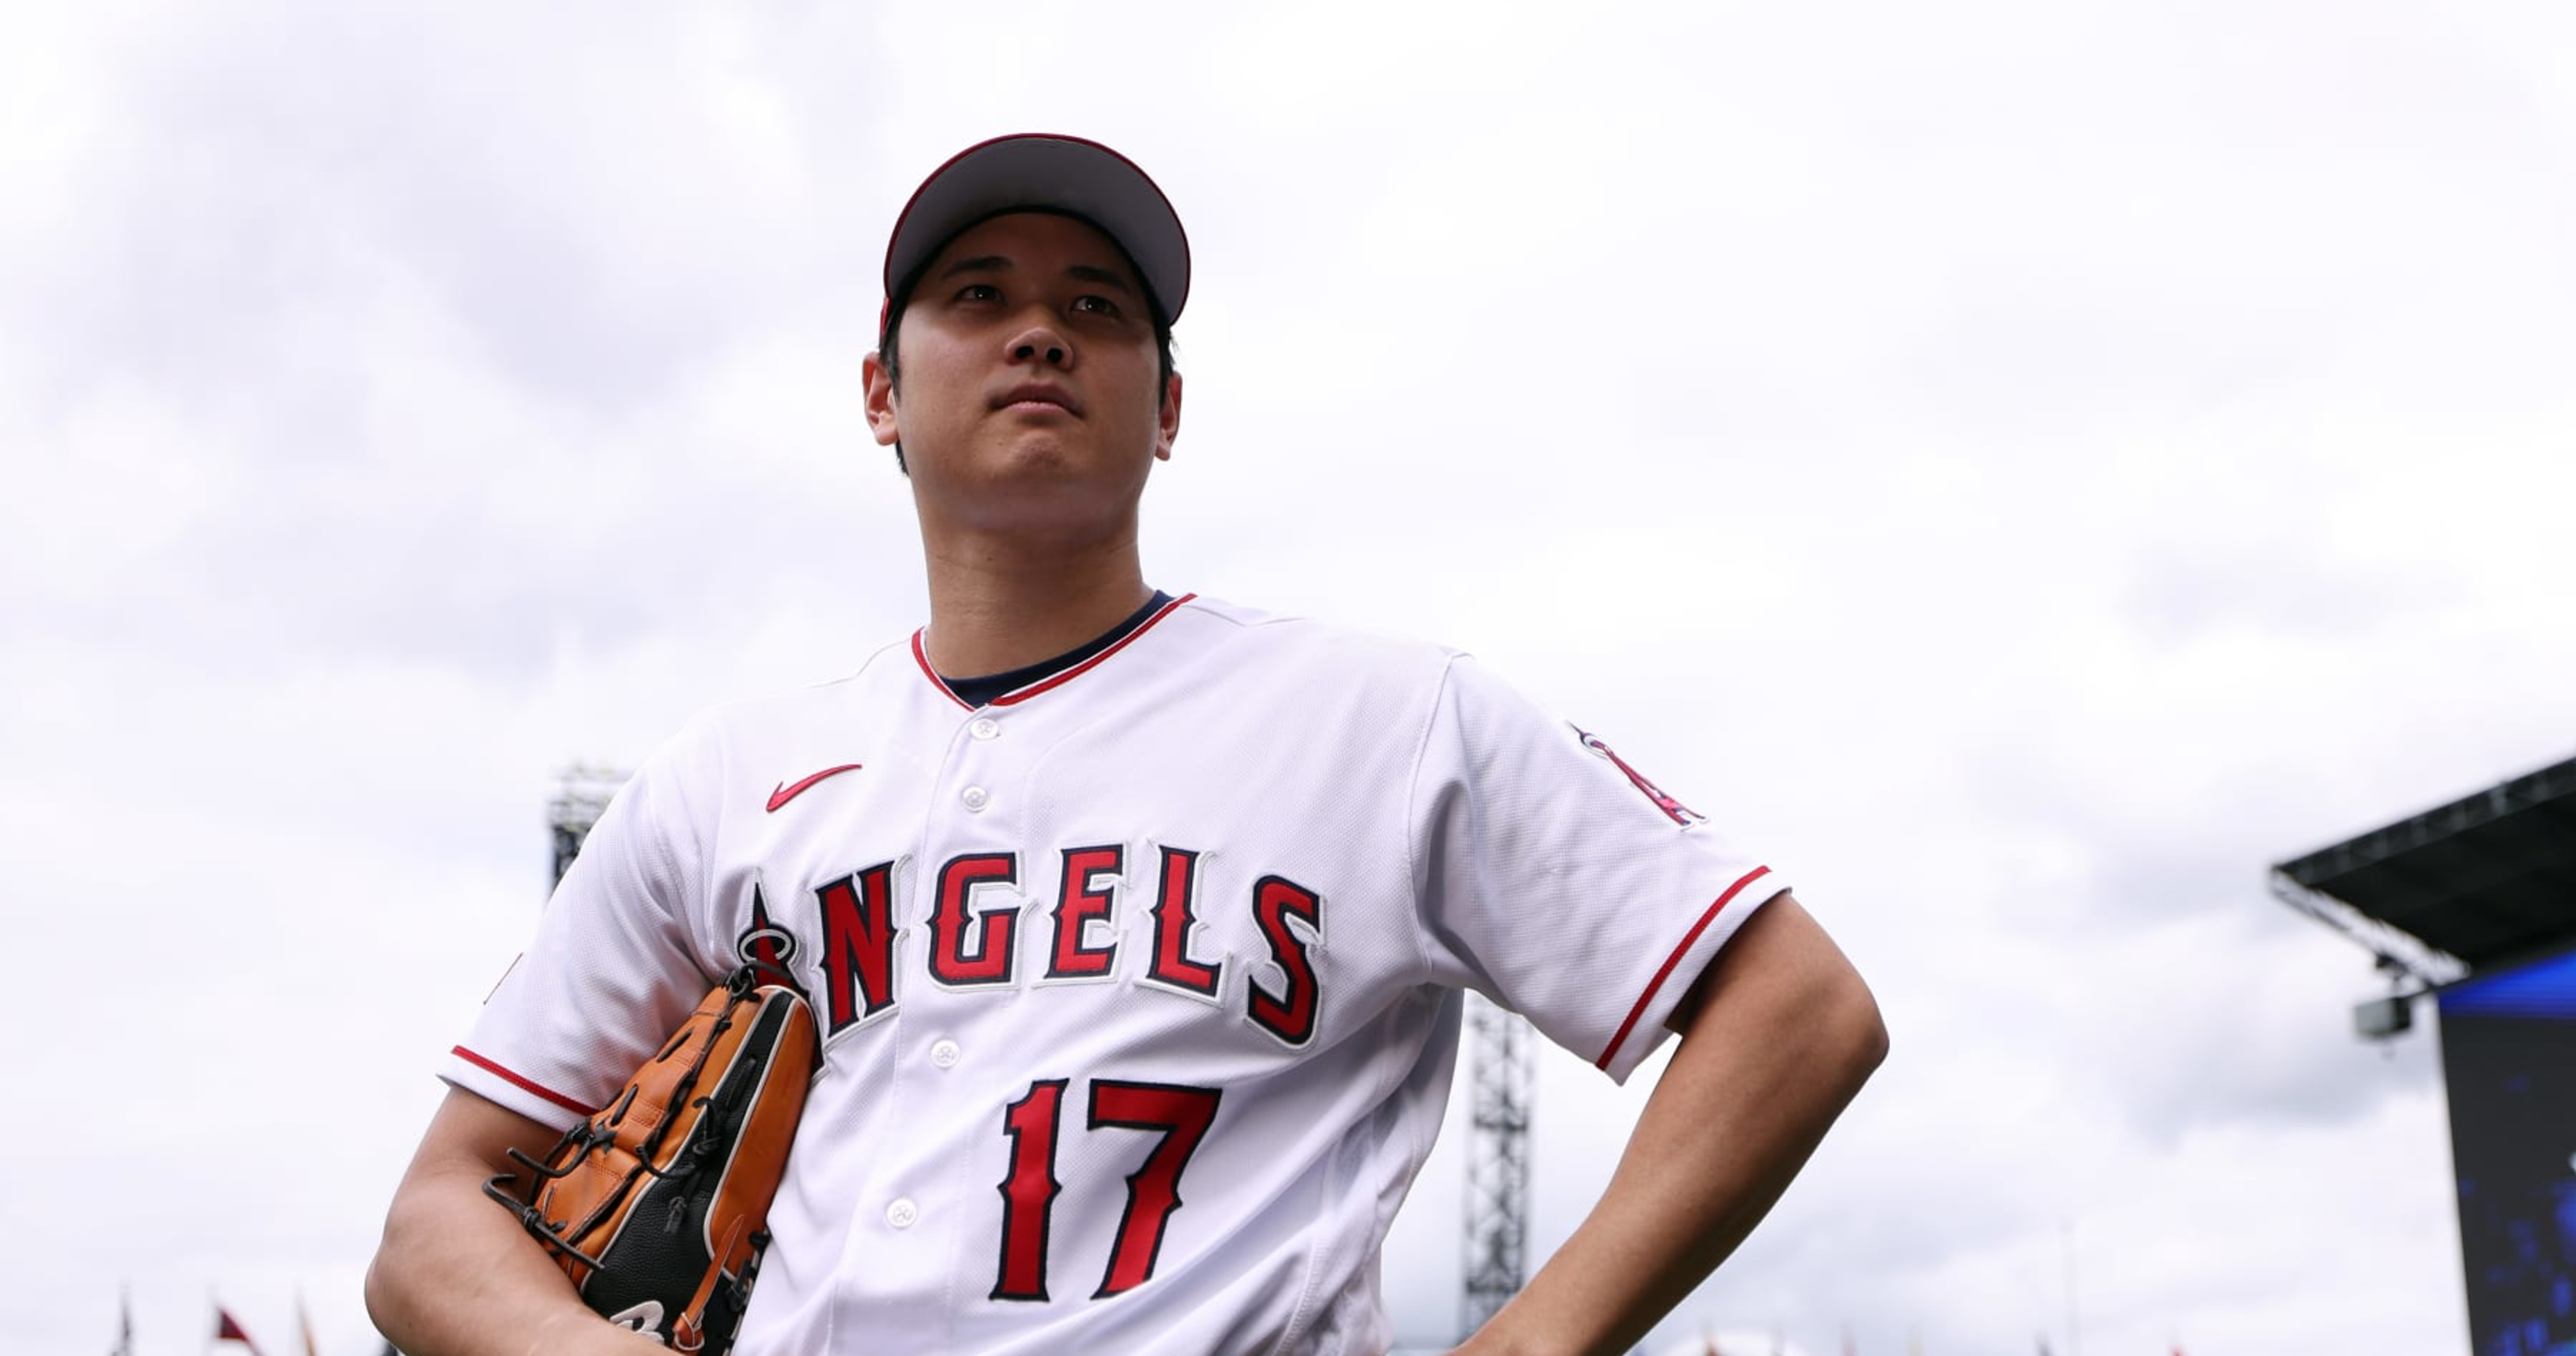 Shohei Ohtani chose No. 17, but joked that he wanted to wear Mike